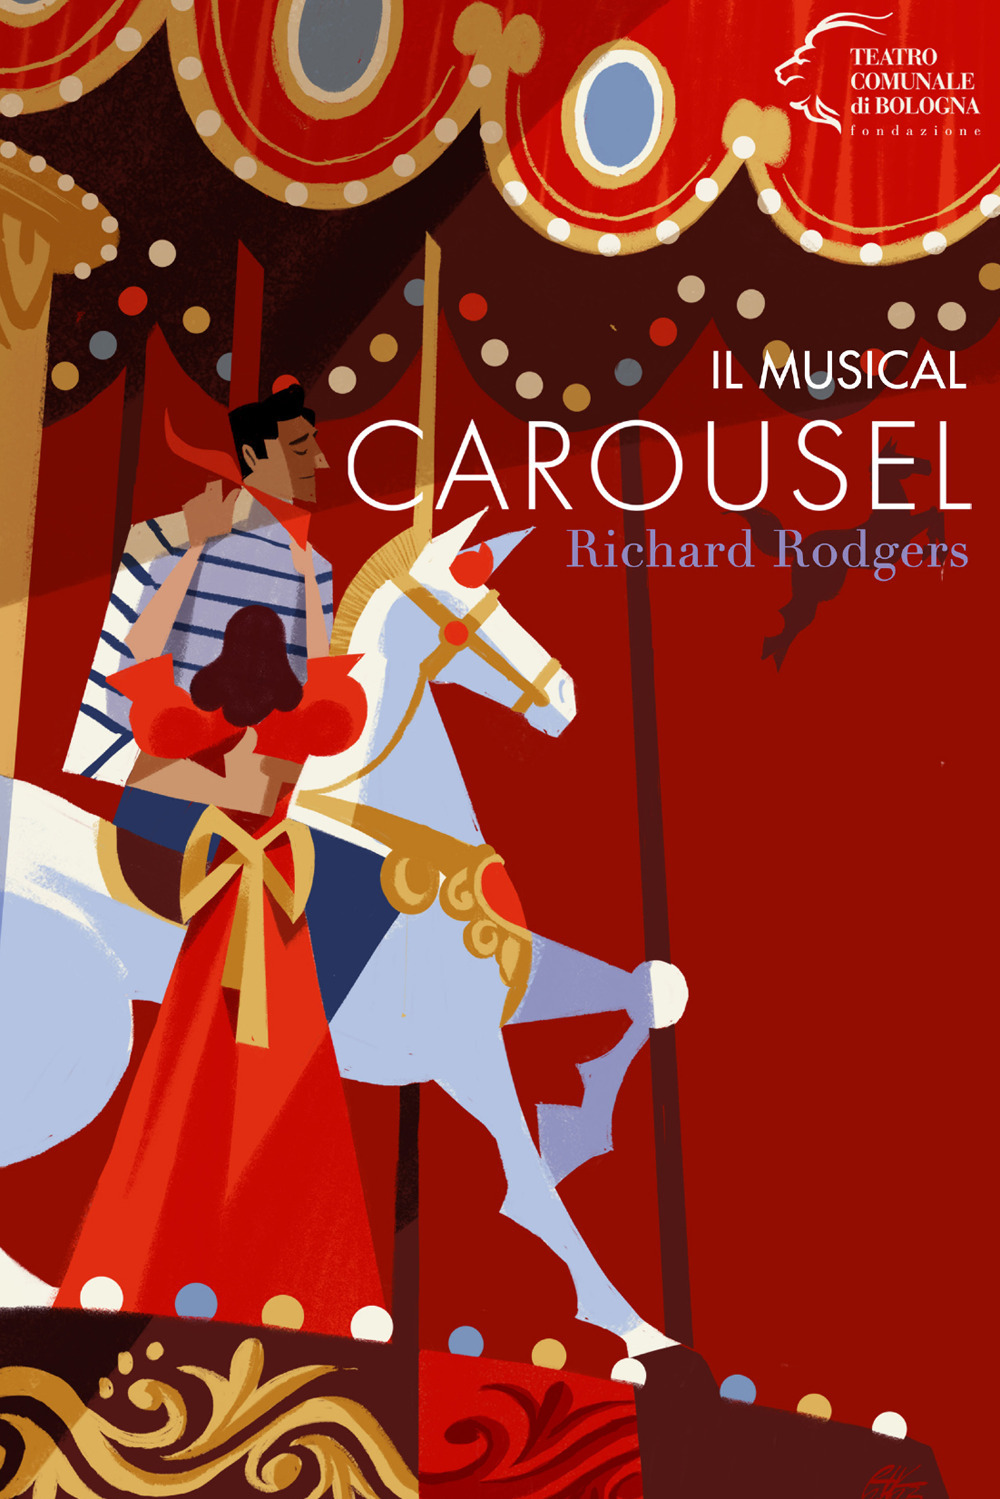 Il musical Carousel. Richard Rodgers